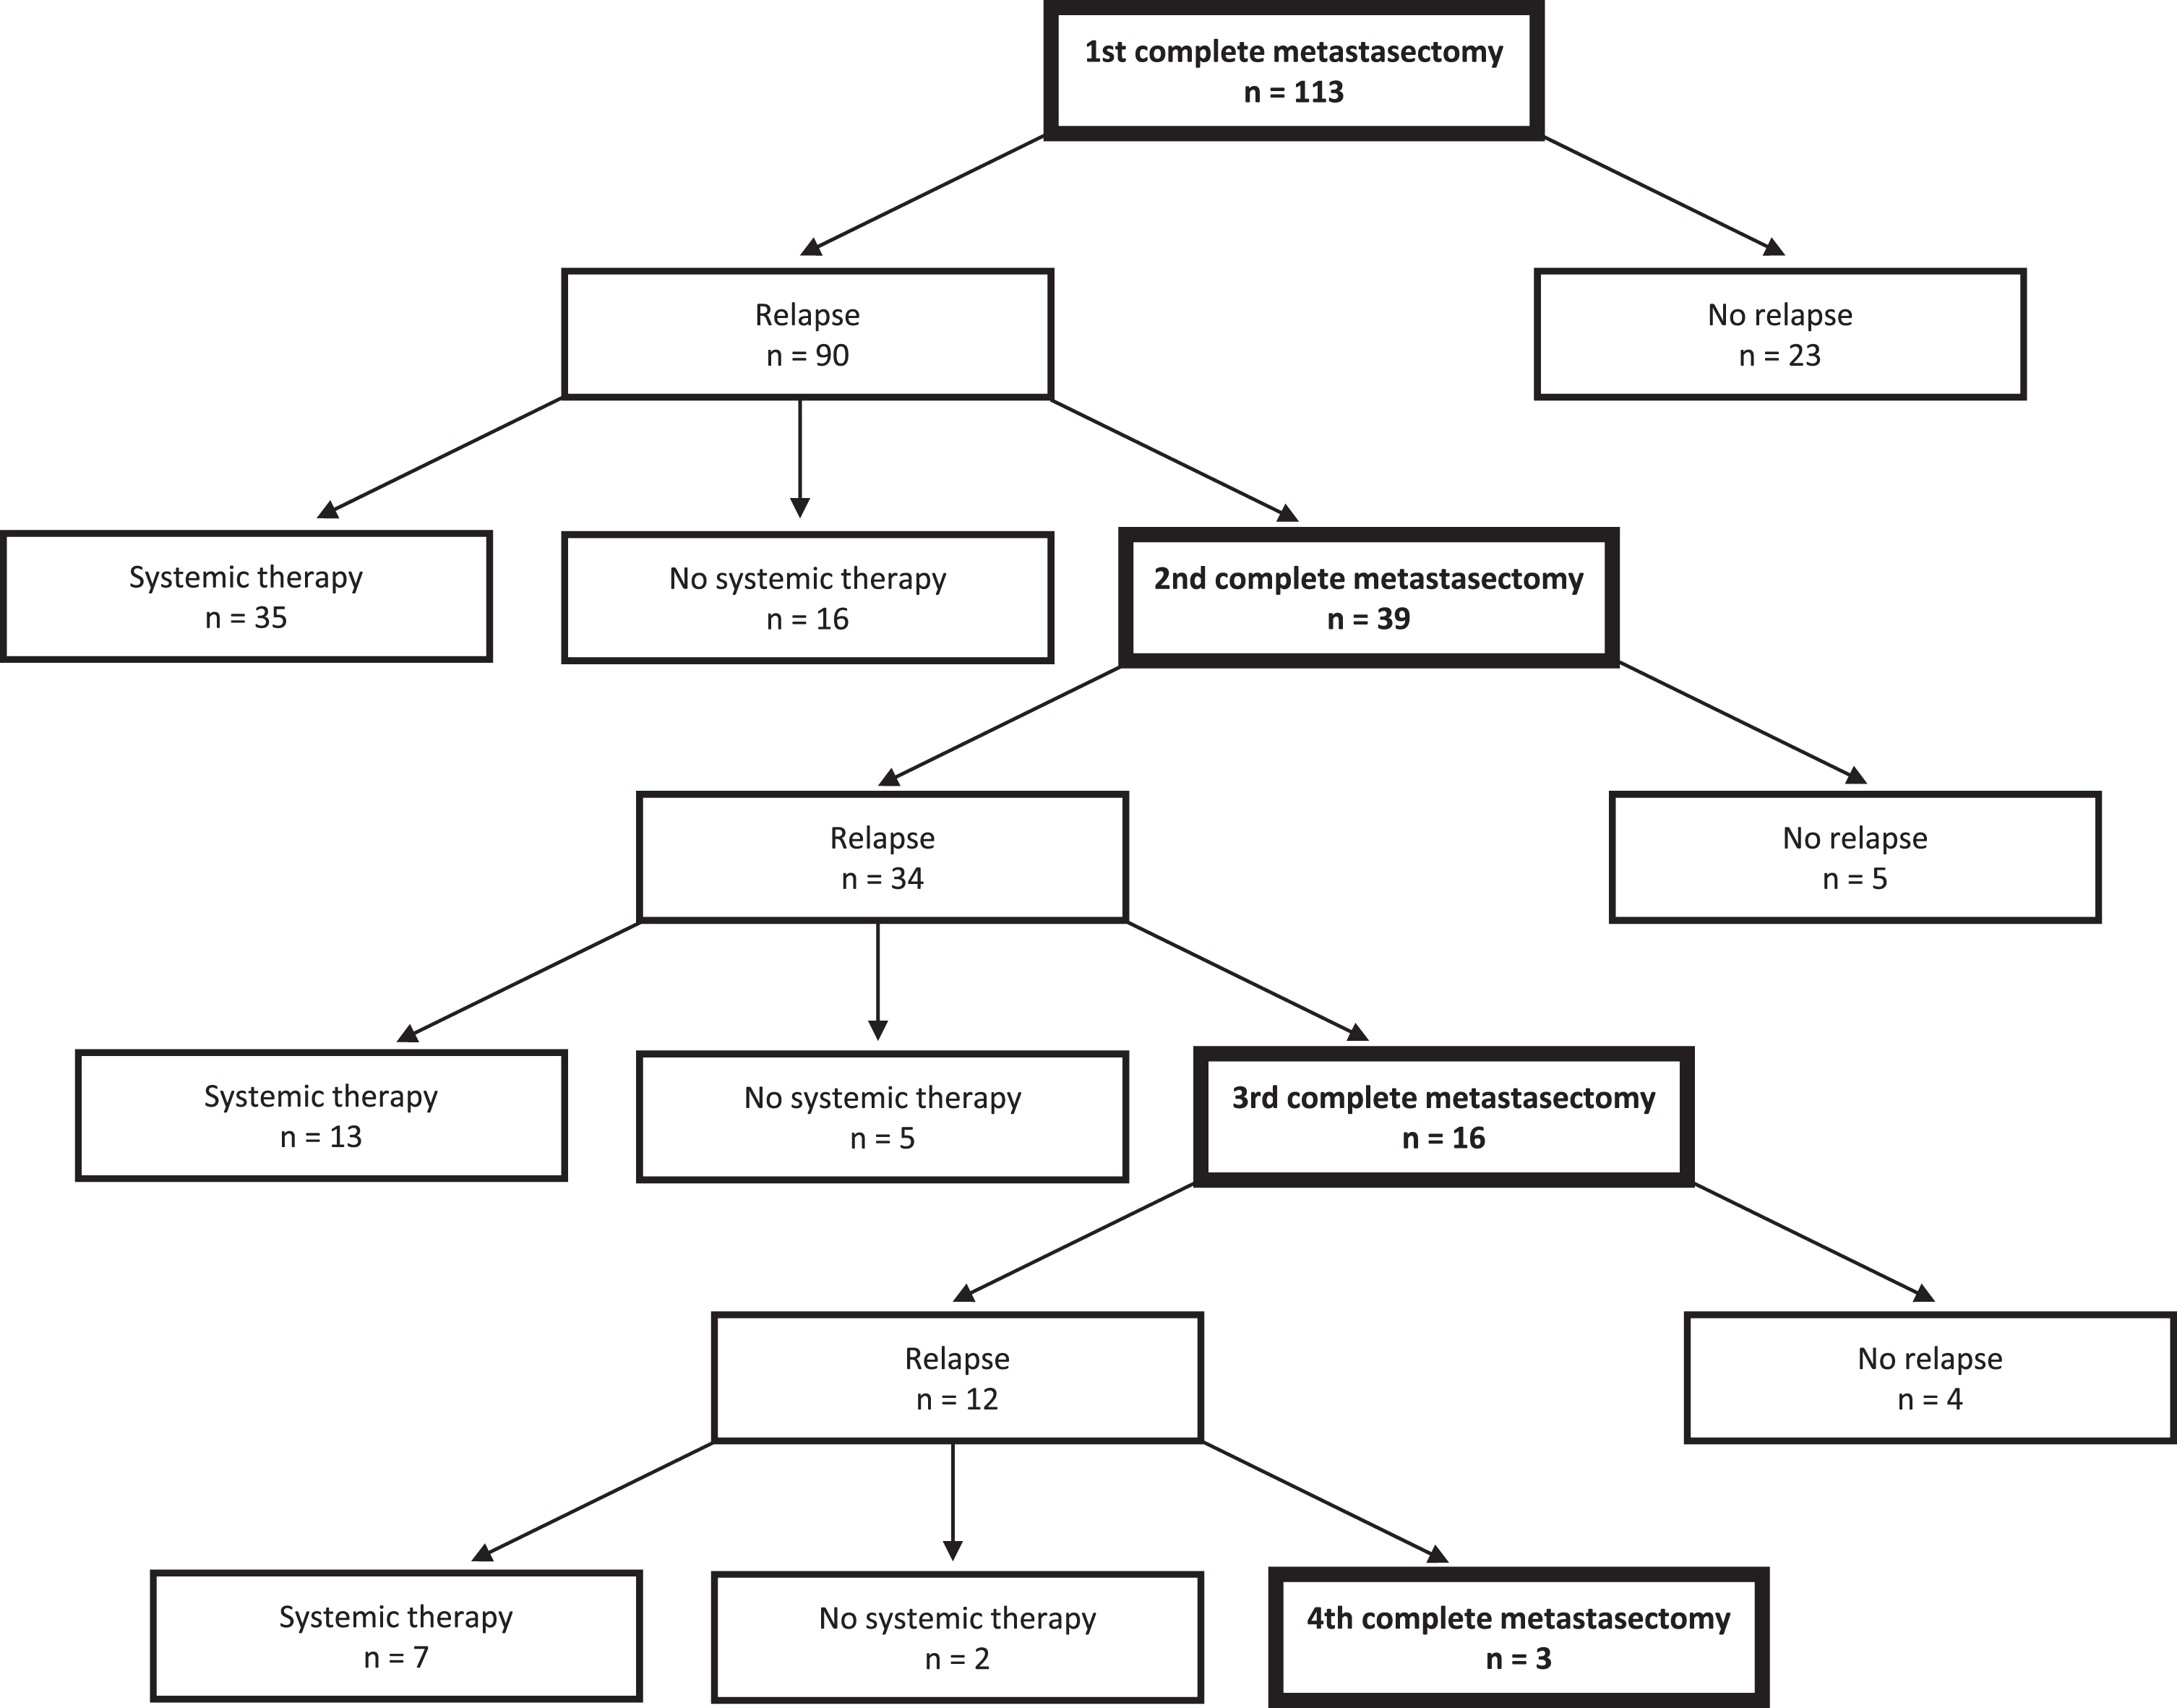 Flow chart of the clinical course of 113 included patients during follow-up.